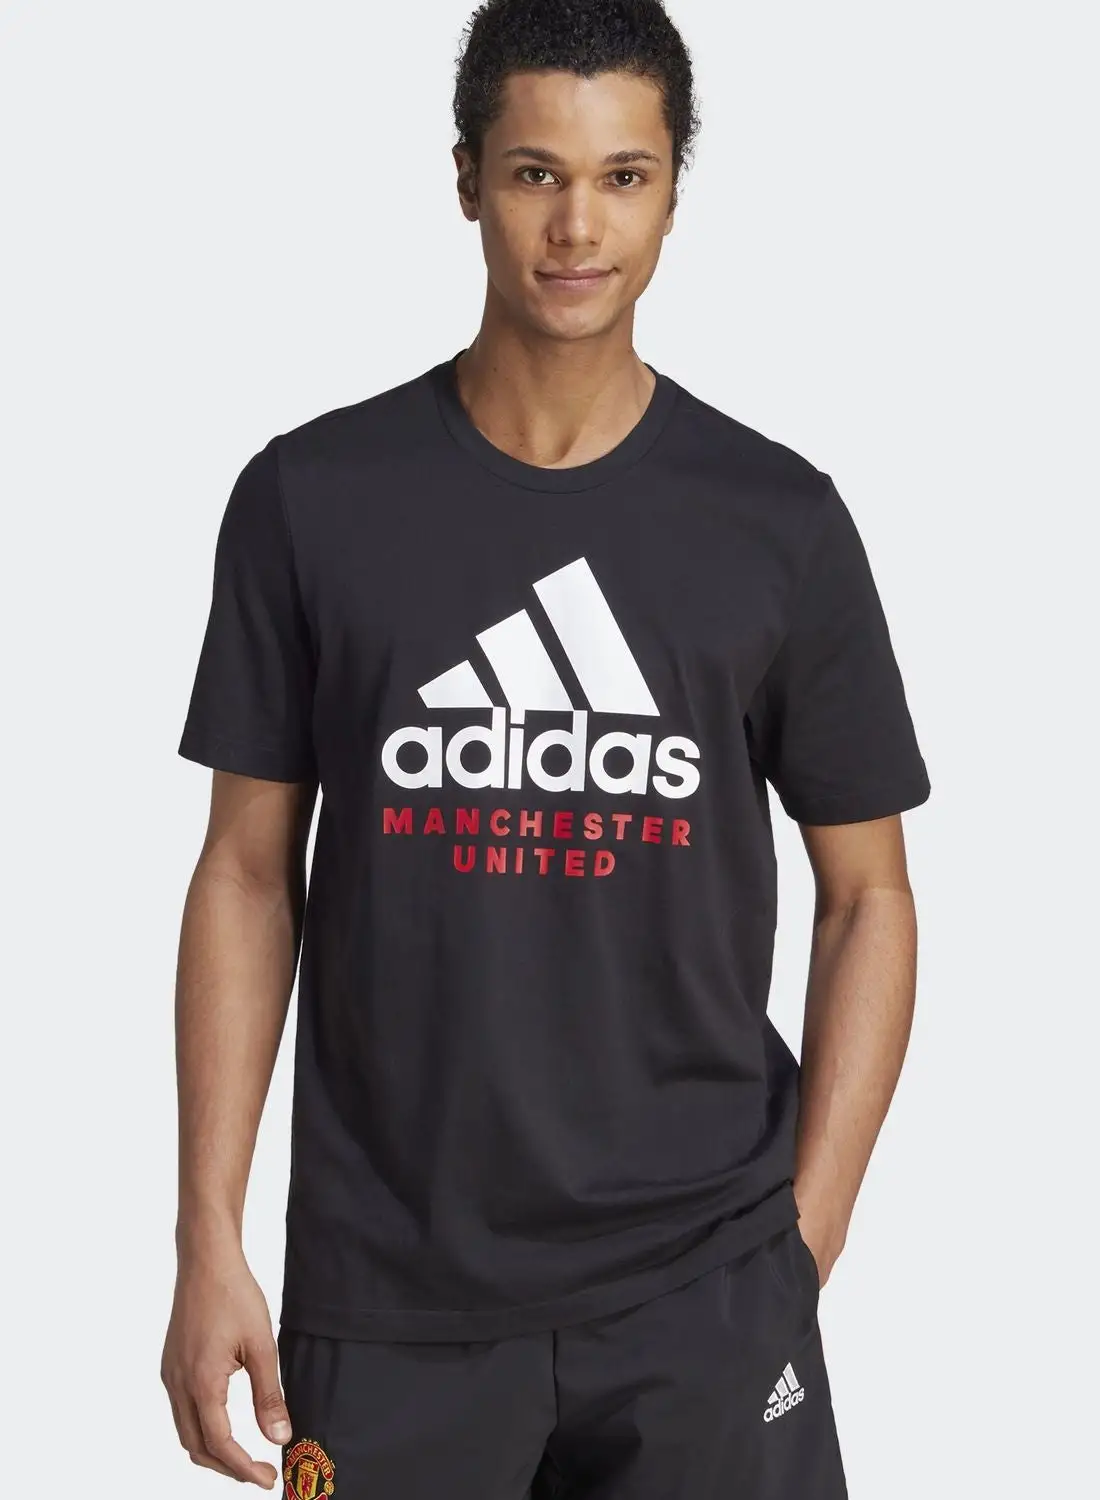 Adidas Manchester United Dna Graphic T-Shirt